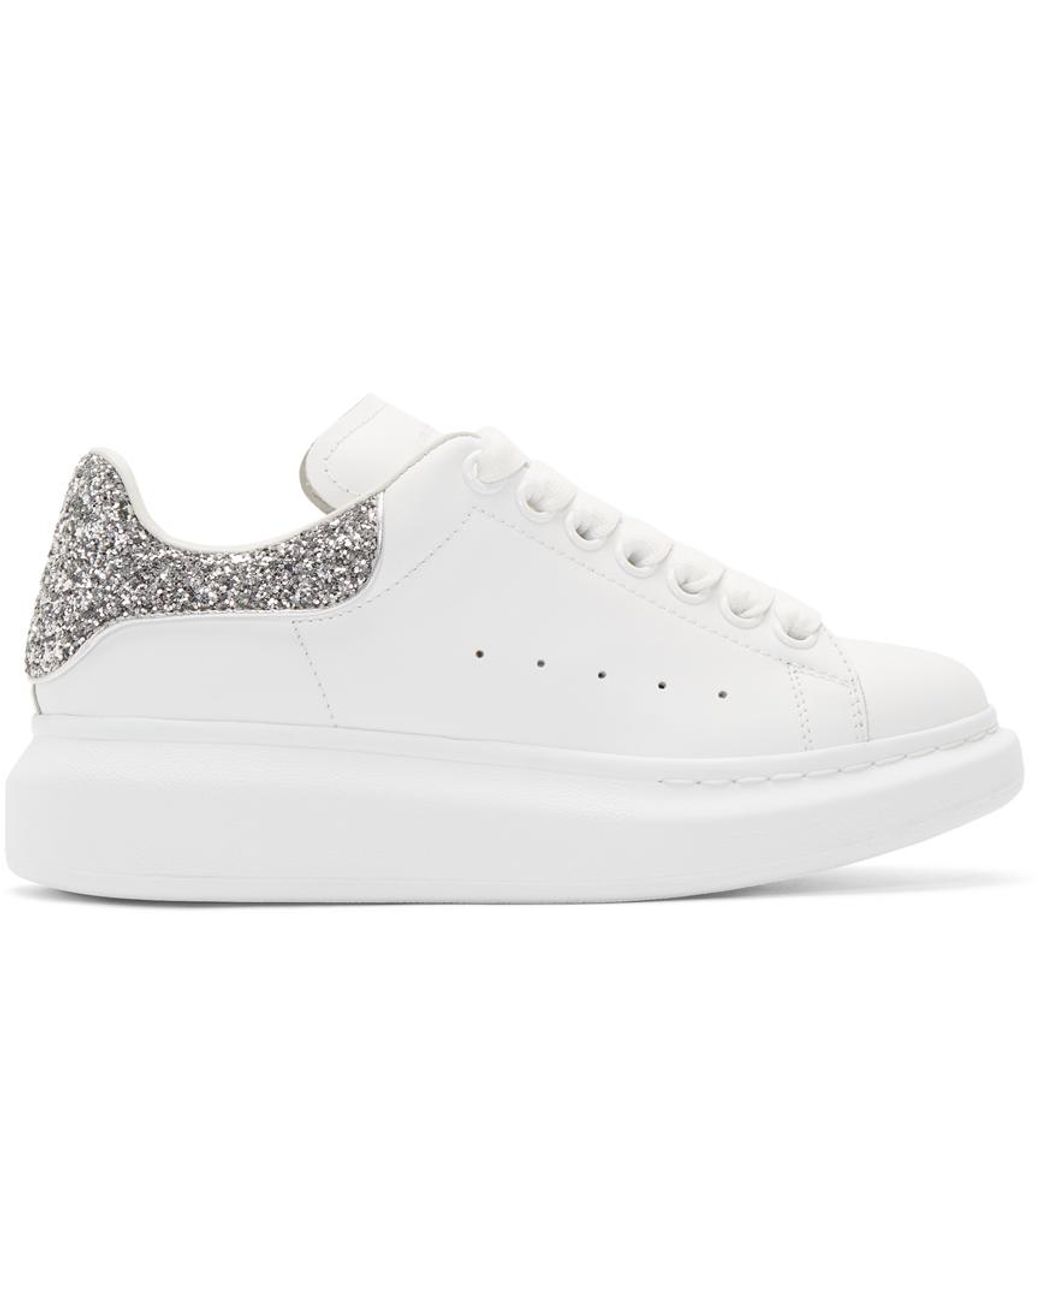 Alexander McQueen Ssense Exclusive White And Silver Glitter Oversized ...